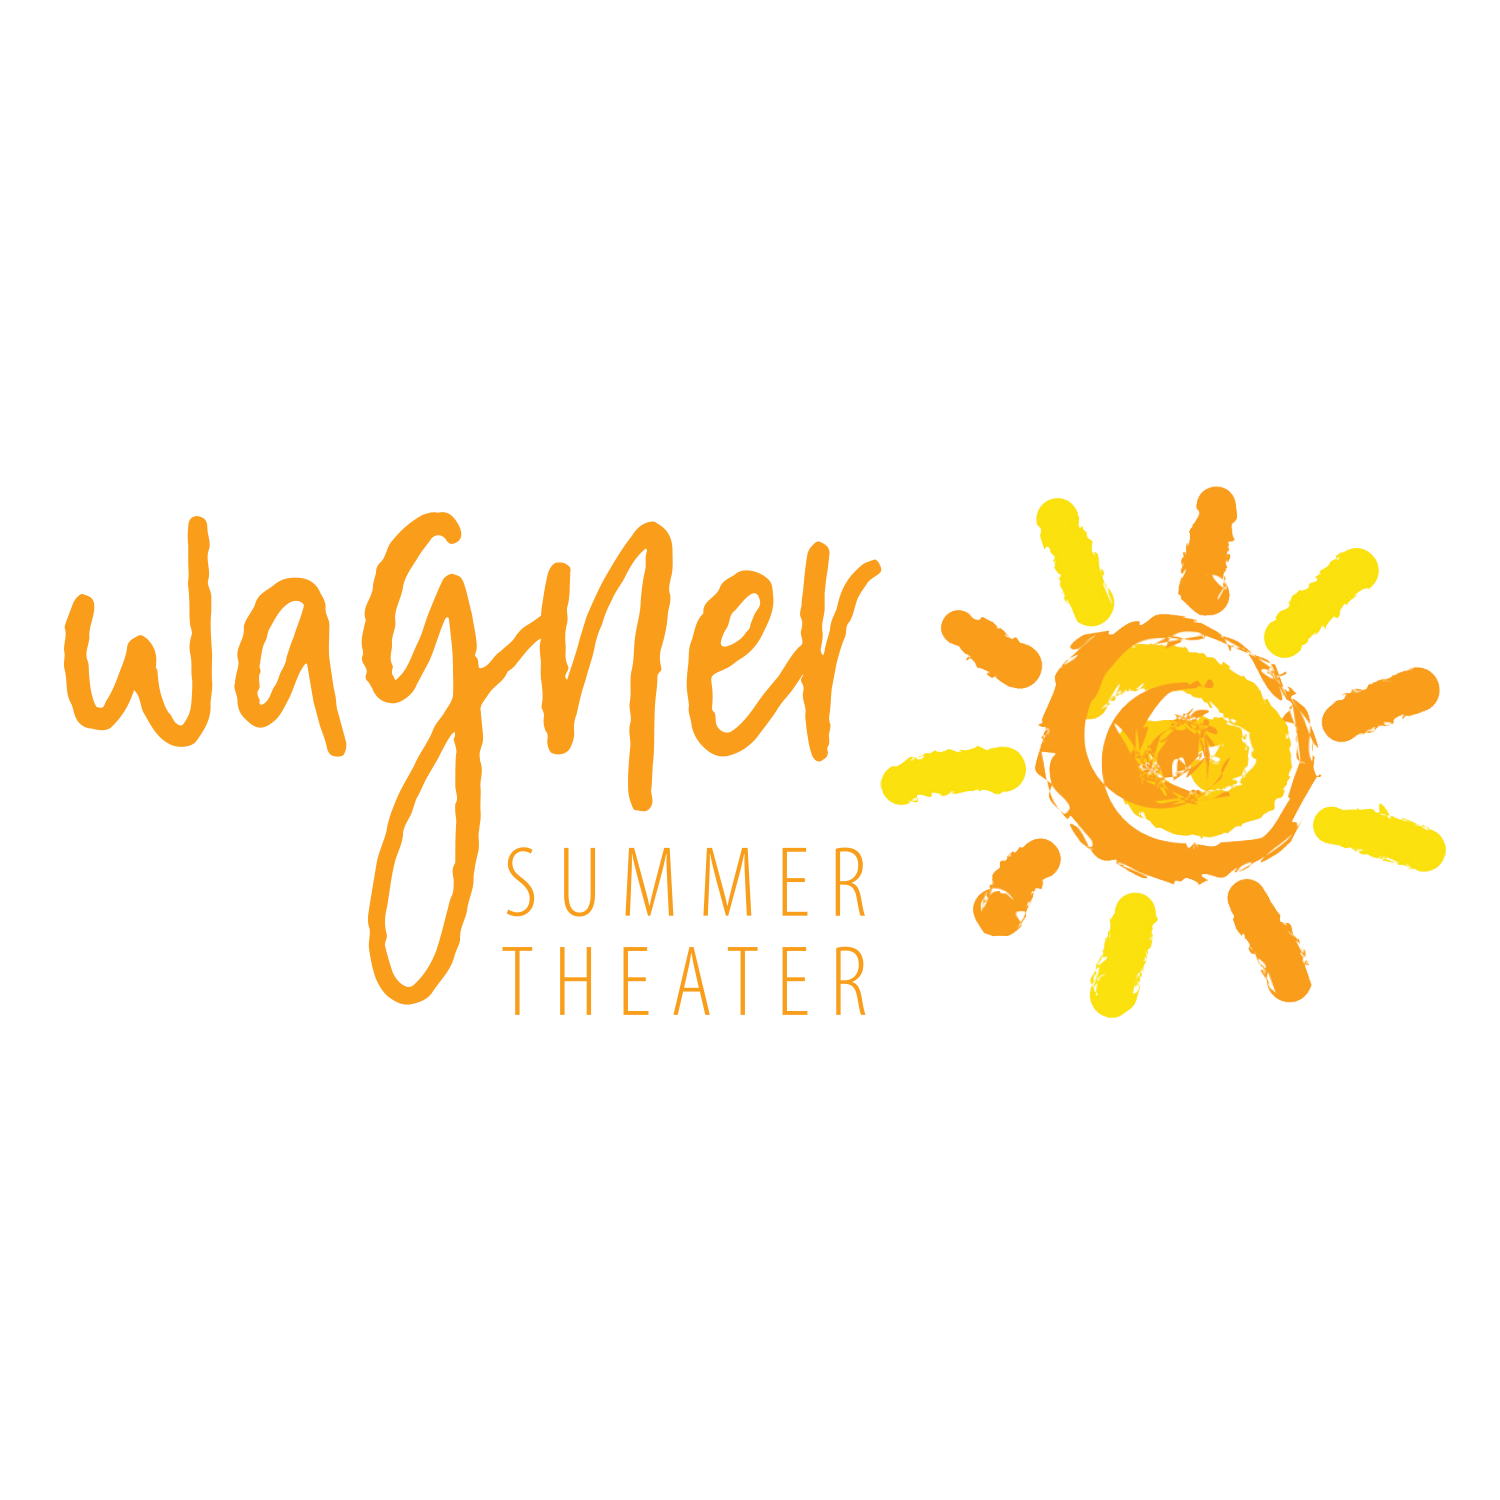 Wagner Summer Theater